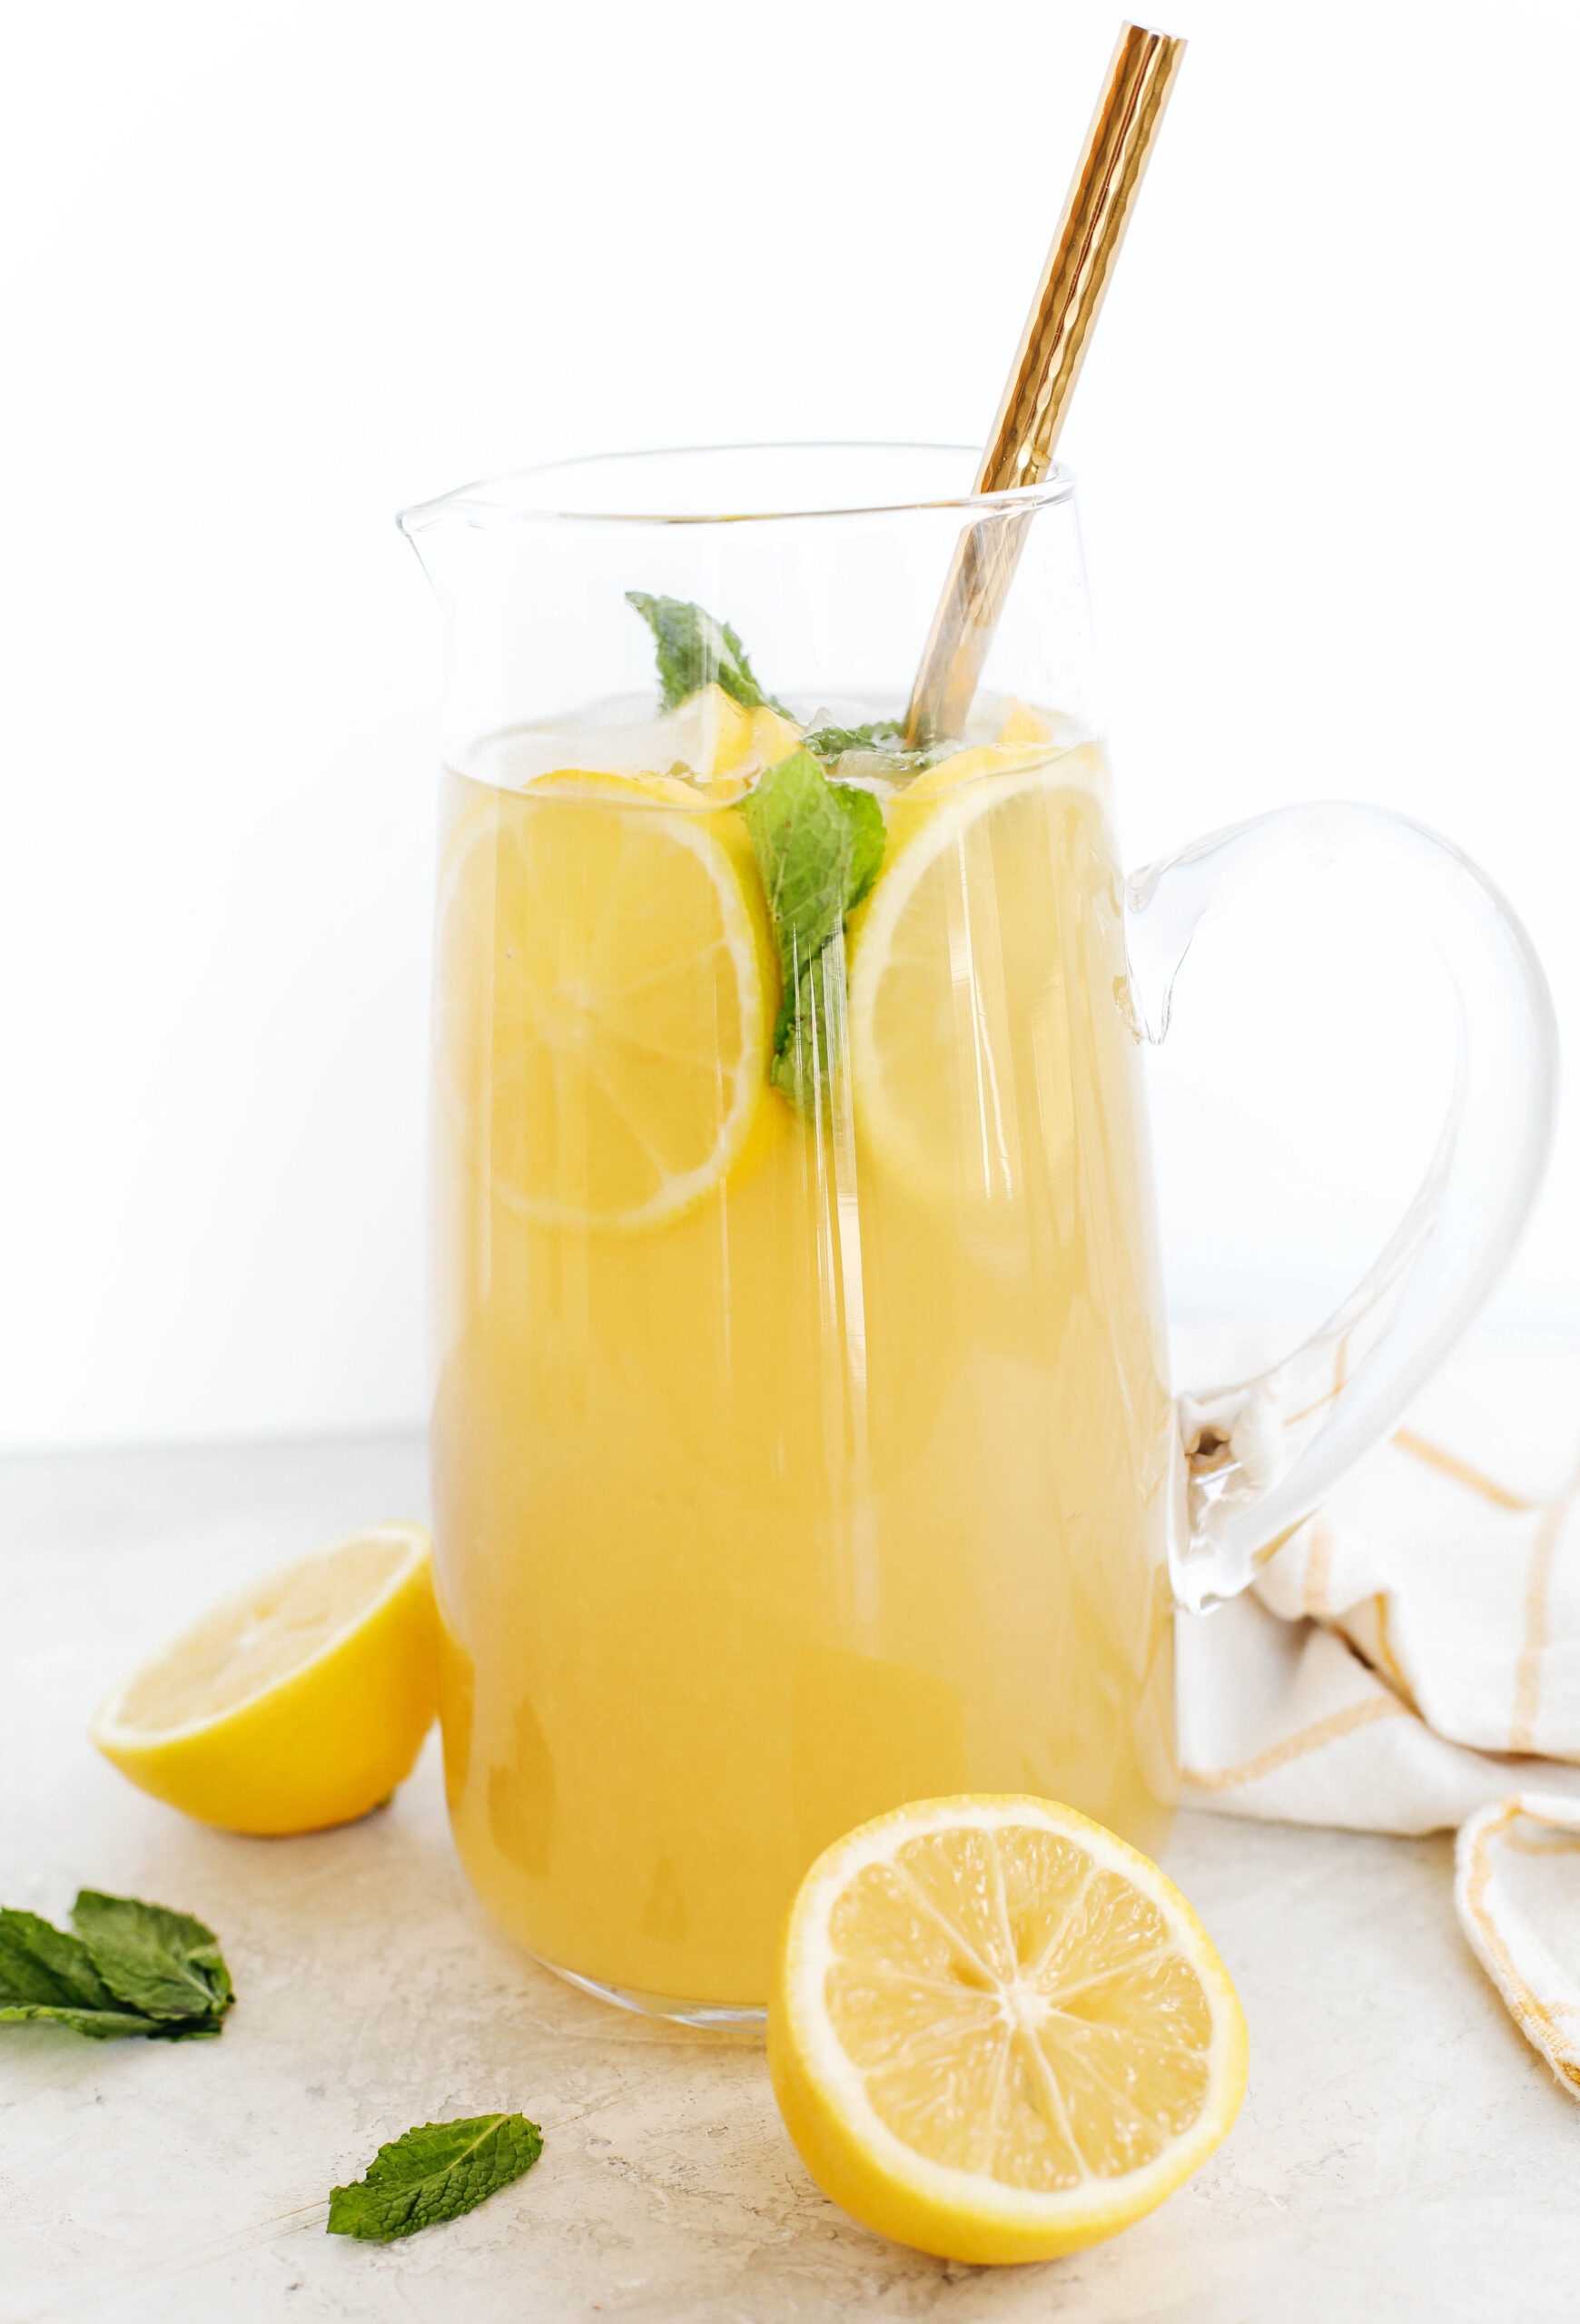 This Honey Ginger Lemonade makes the perfect summer beverage that is refreshing, delicious and easily made with just 4 simple ingredients!